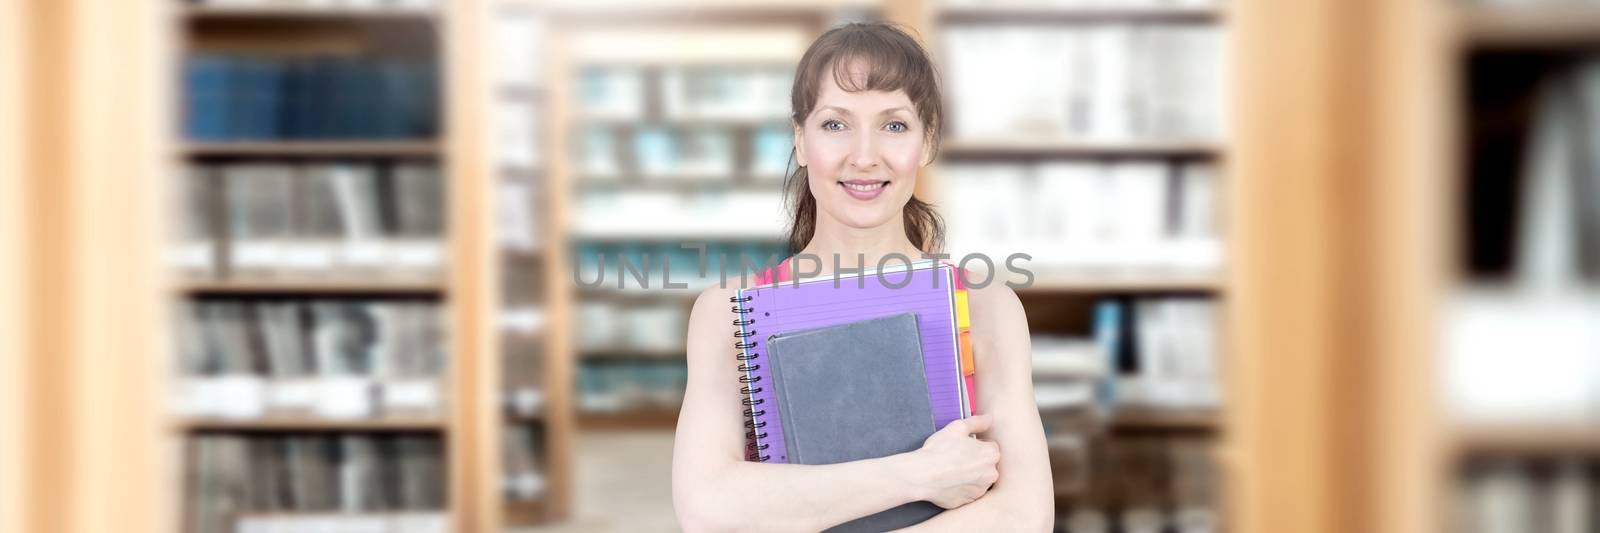 Digital composite of Student mature woman in education library